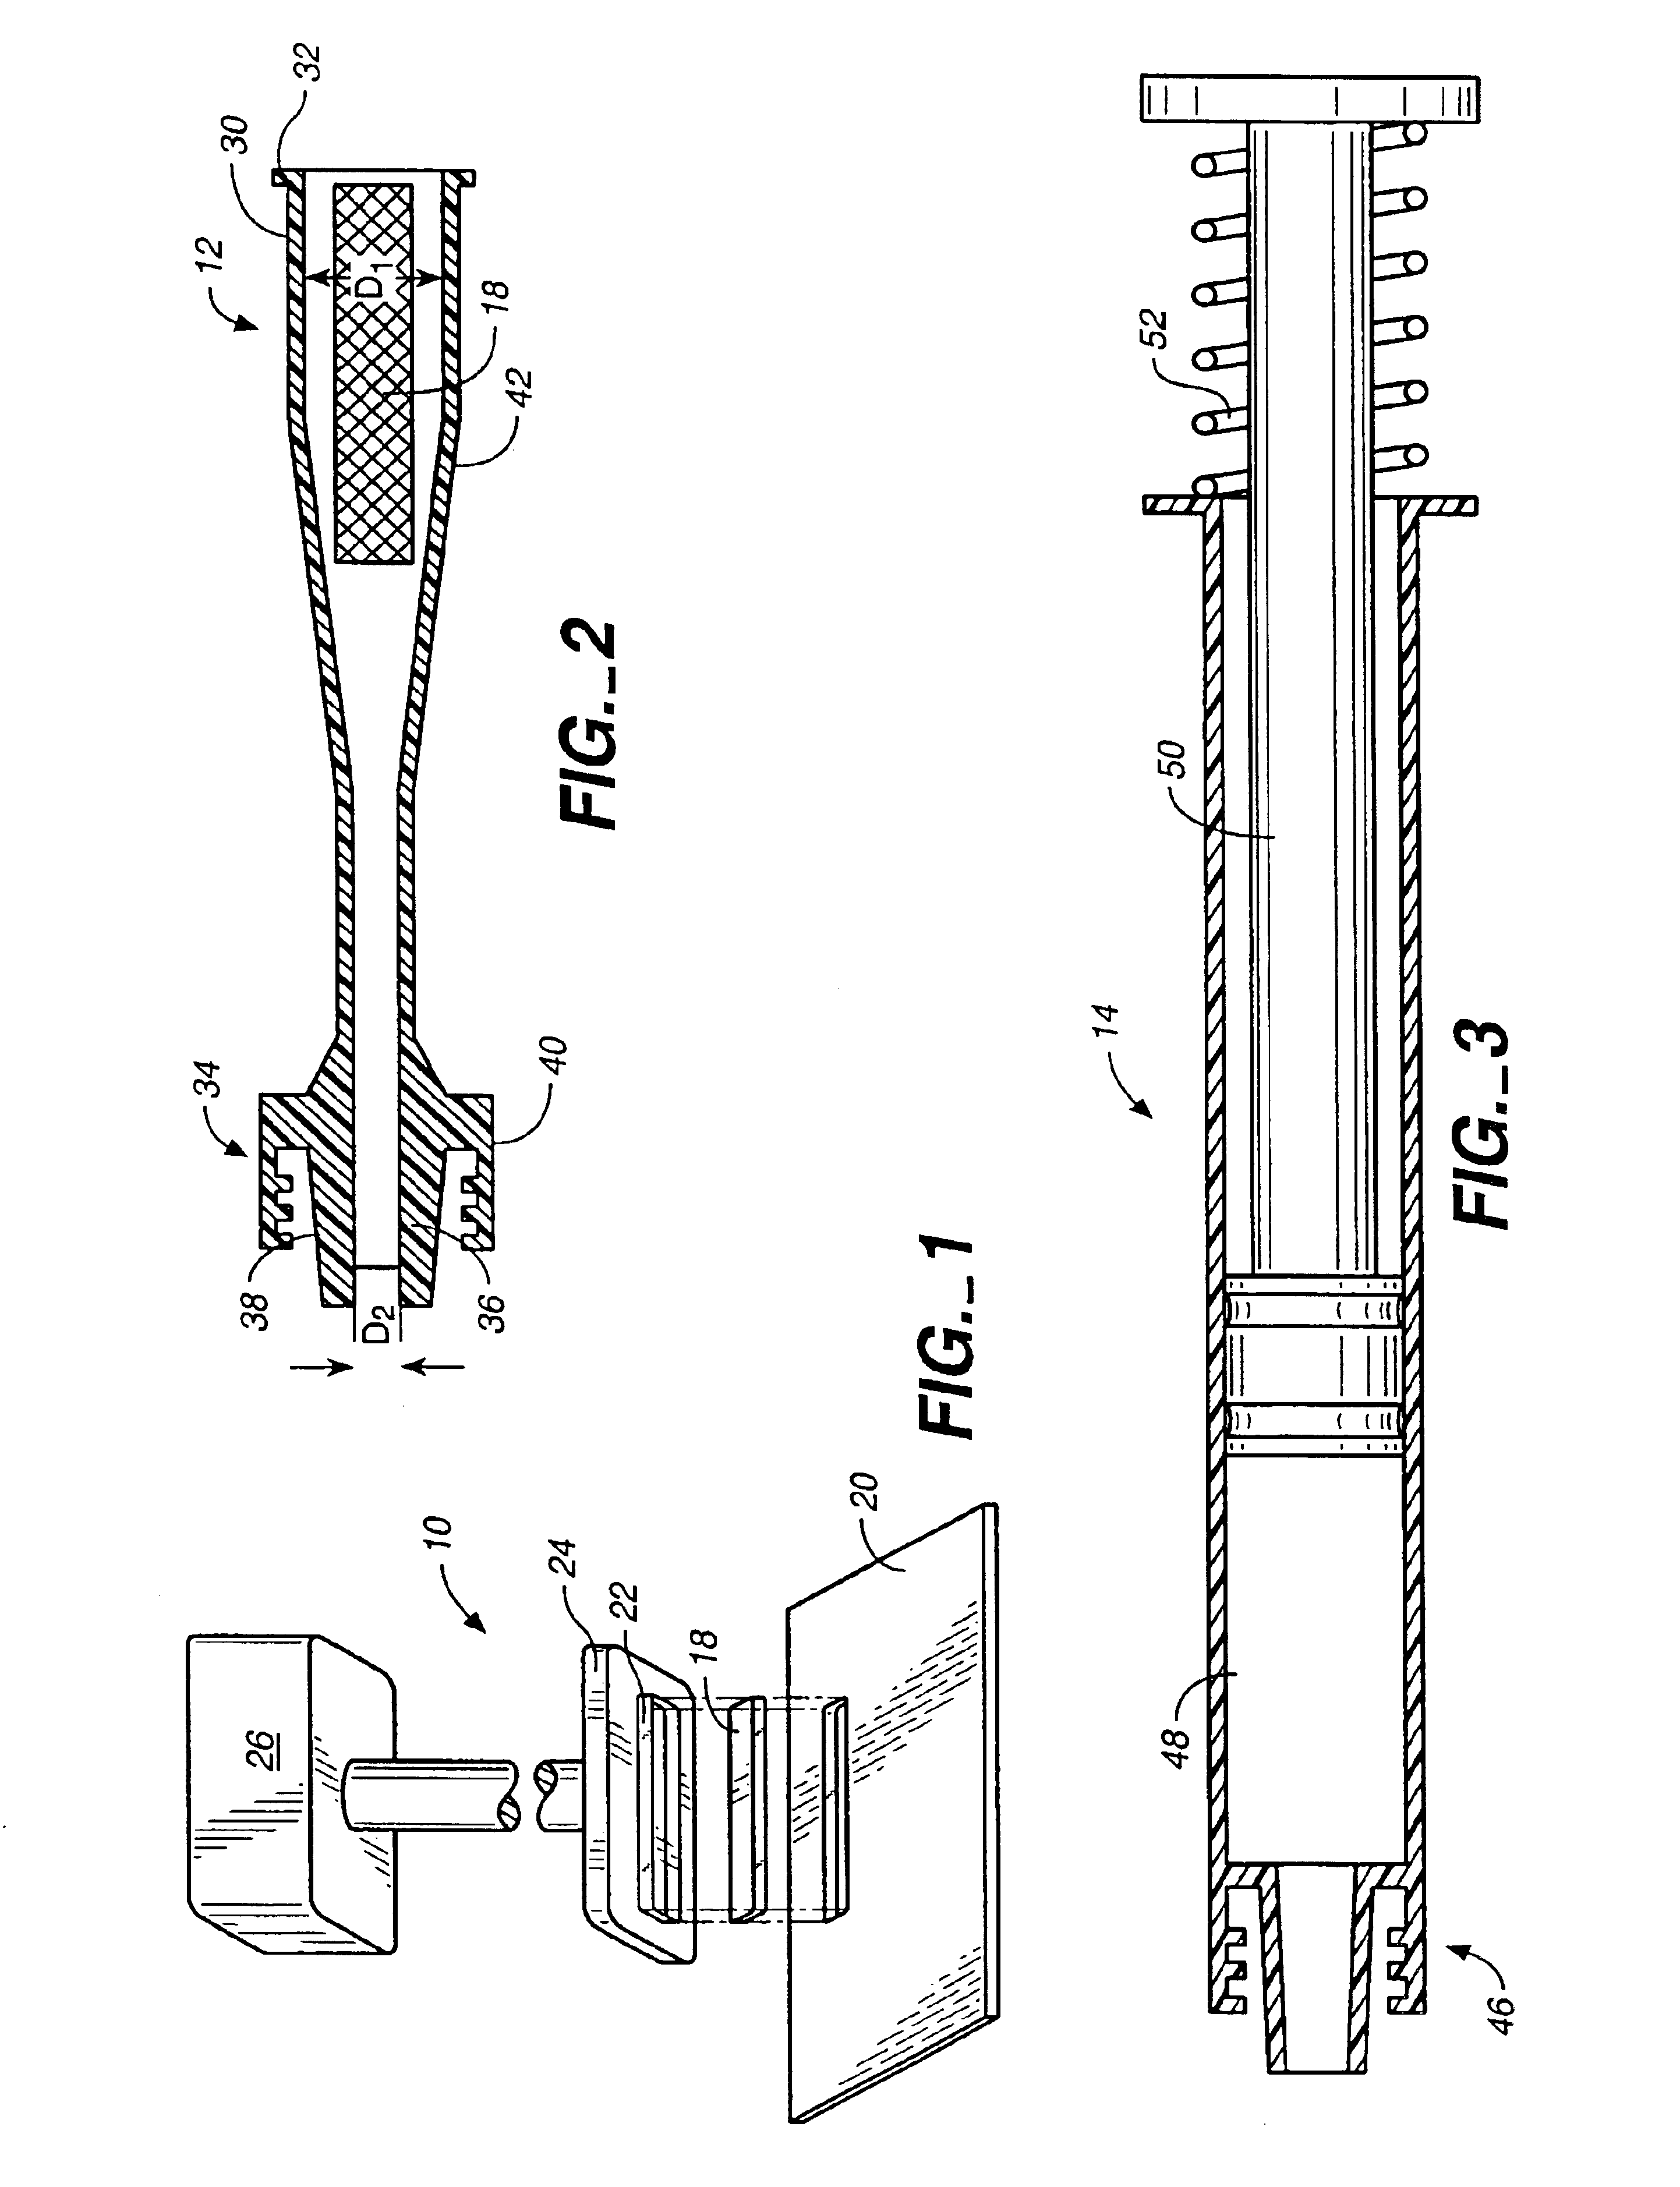 Device and method for facilitating hemostasis of a biopsy tract